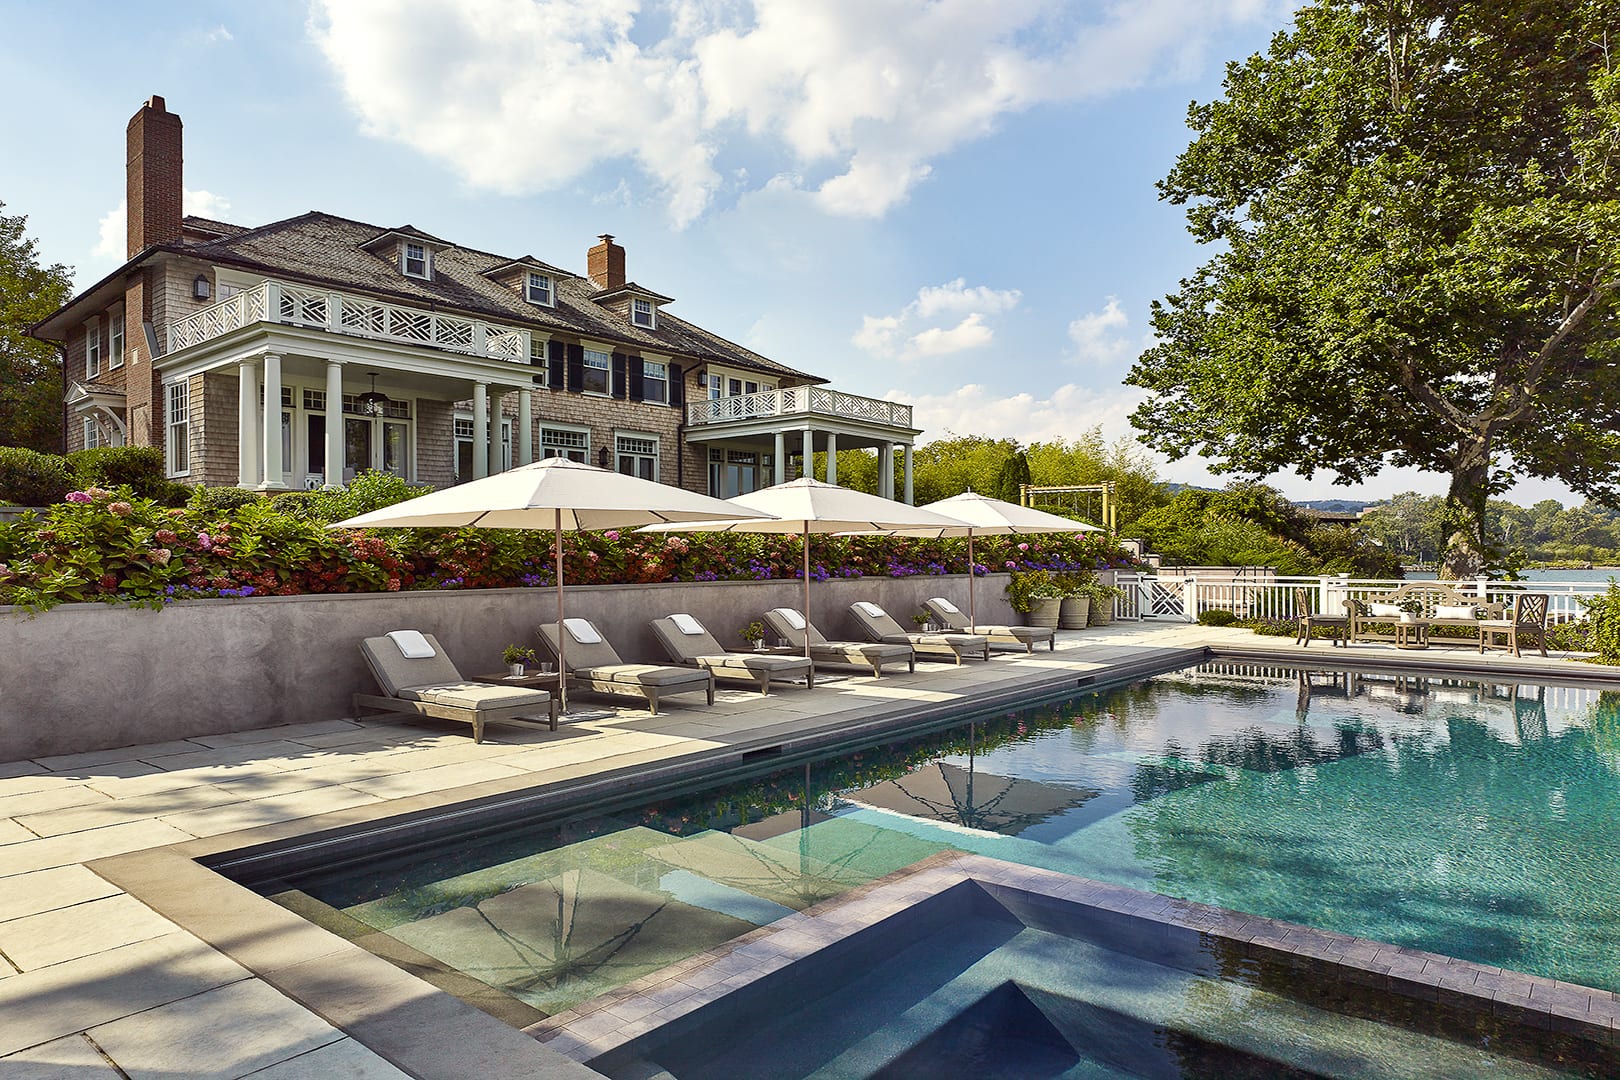 Chiseled into the sloping terrain between the main house and the Hudson River, the newly constructed terrace with its infinity edge pool and cabana provides a superb respite from the bustling streets of New York City, less than an hour away.